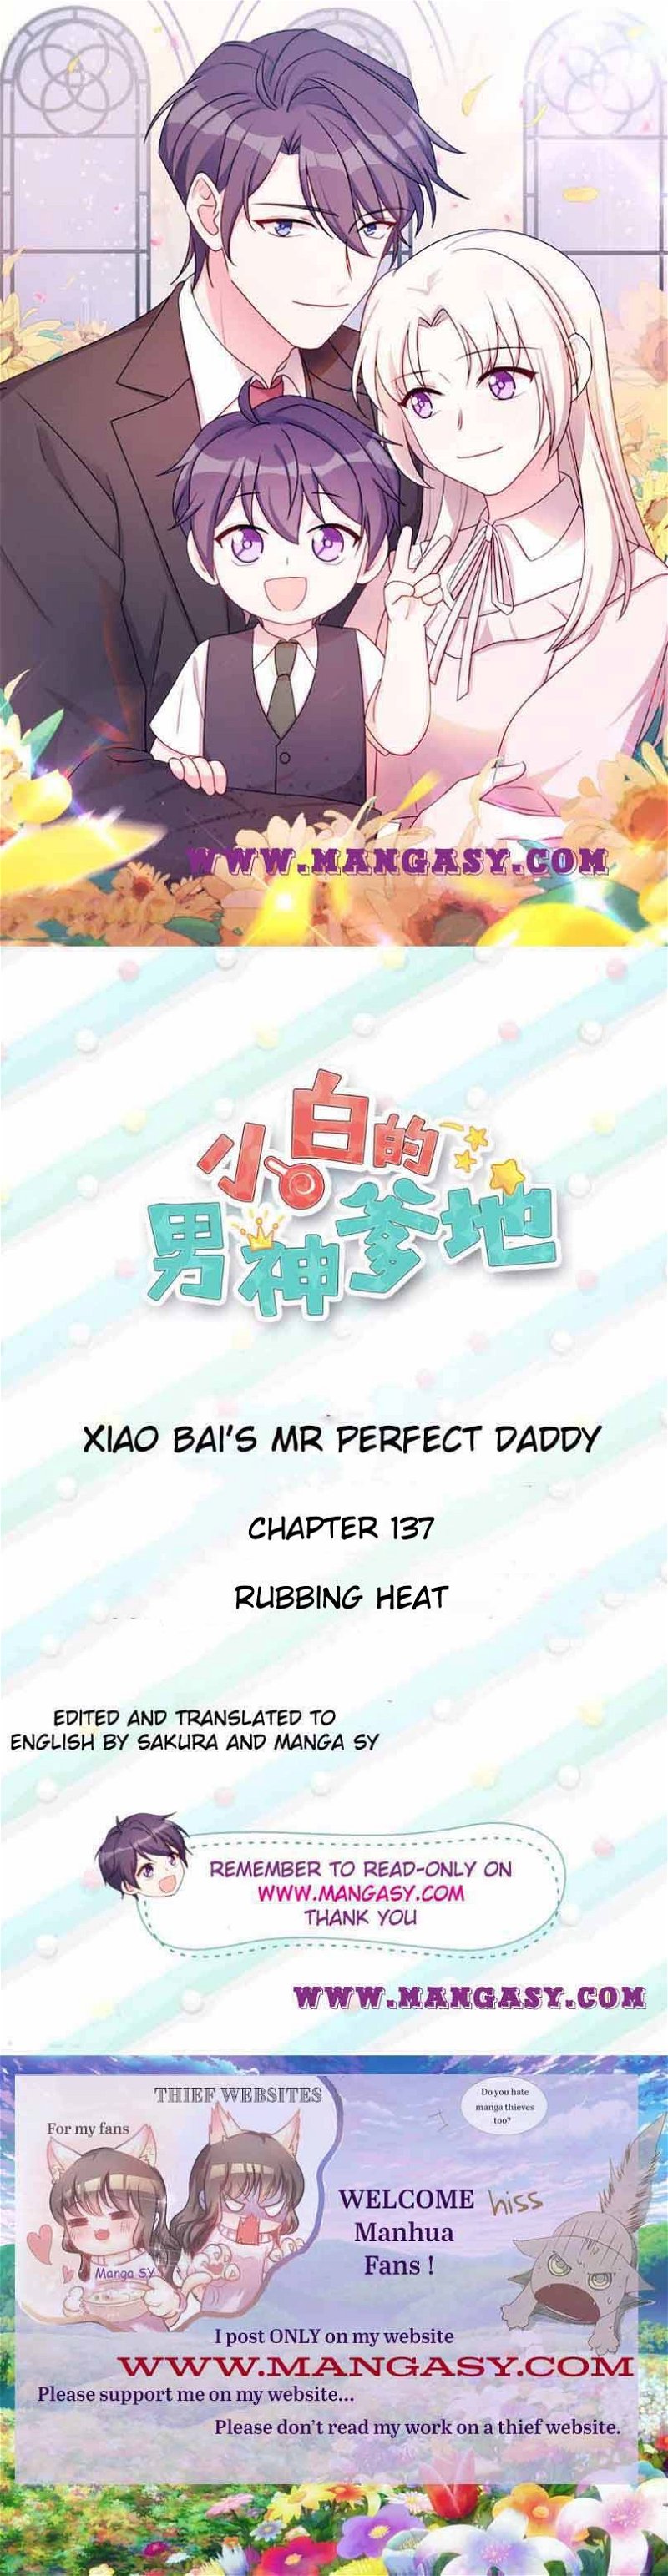 Xiao Bai’s father is a wonderful person Chapter 137 - Page 0